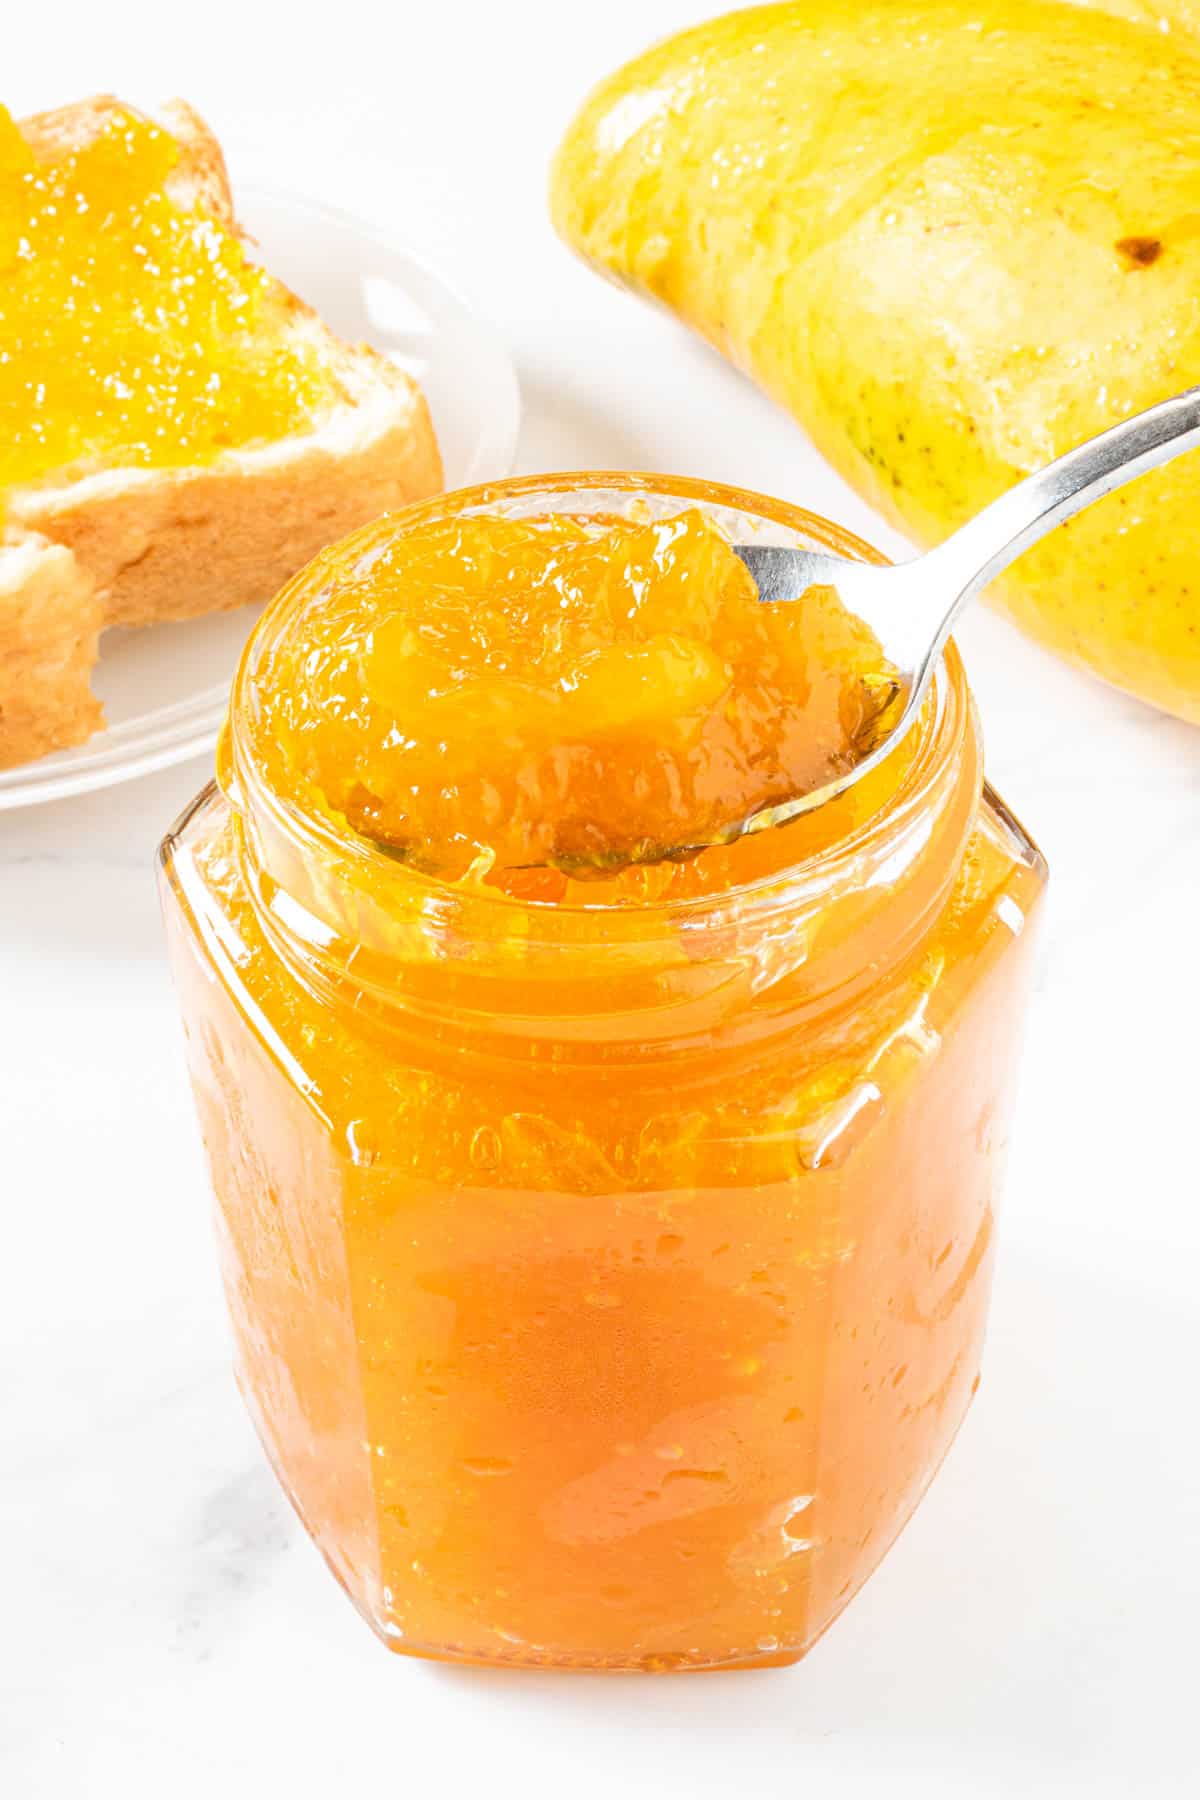 A spoon of yellow jam scooped out of a glass jar